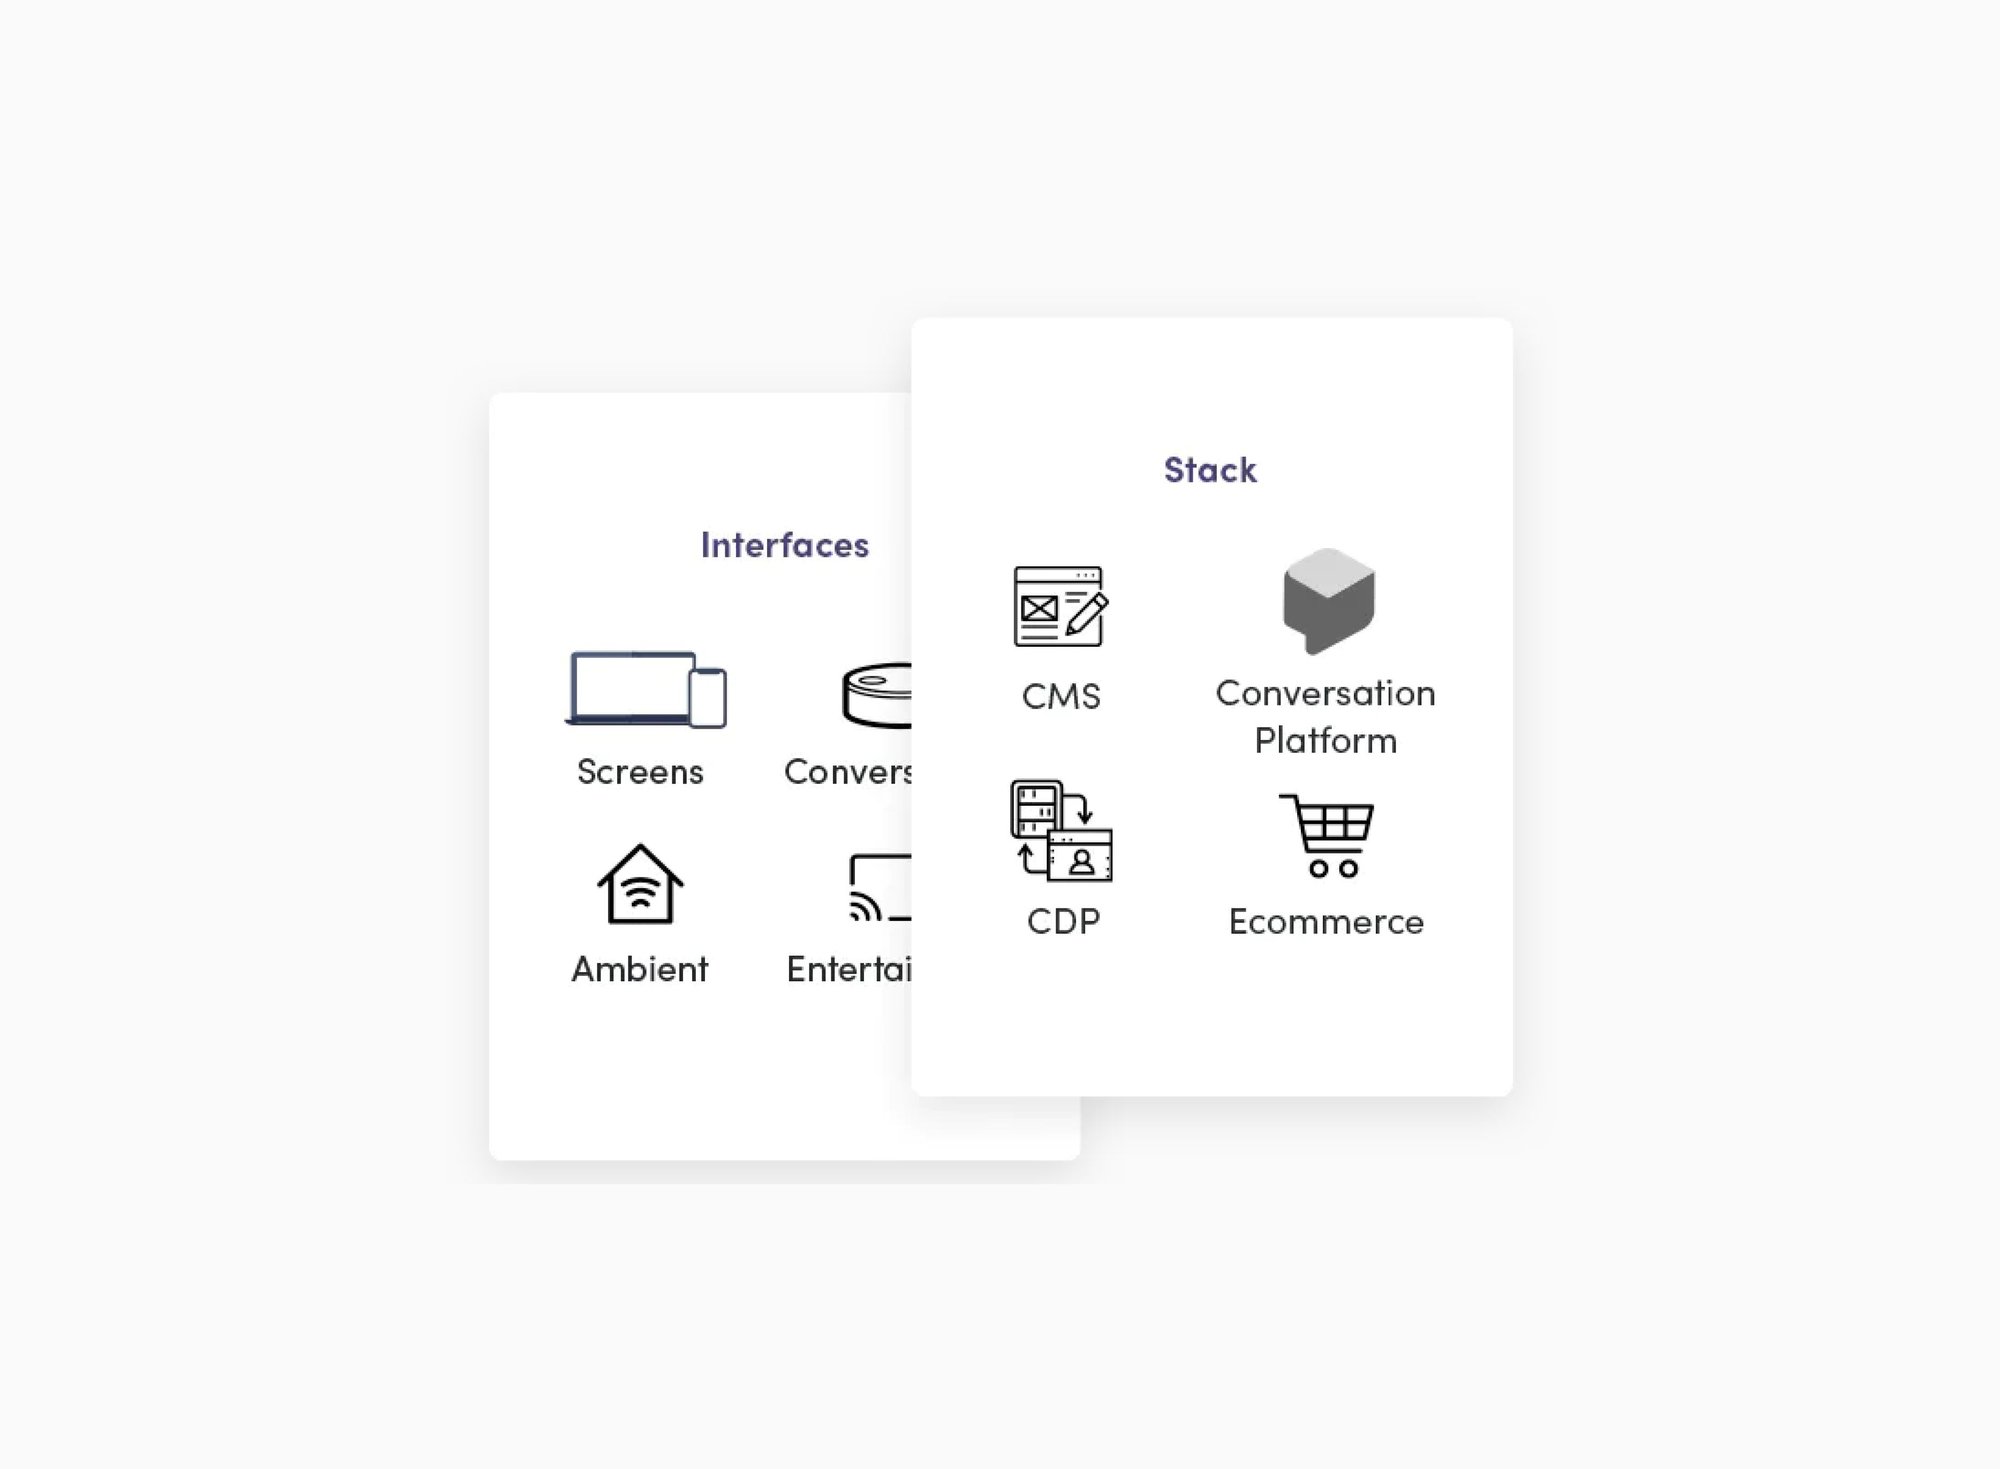 Two illustrative cards: one showing Interfaces (screen, conversation, ambient, and entertainment) with corresponding icons, the second, overlayed above the first, showing: technoglogy stack (CMS, conversational platform, CDP, ecommerce) with corresponding icons